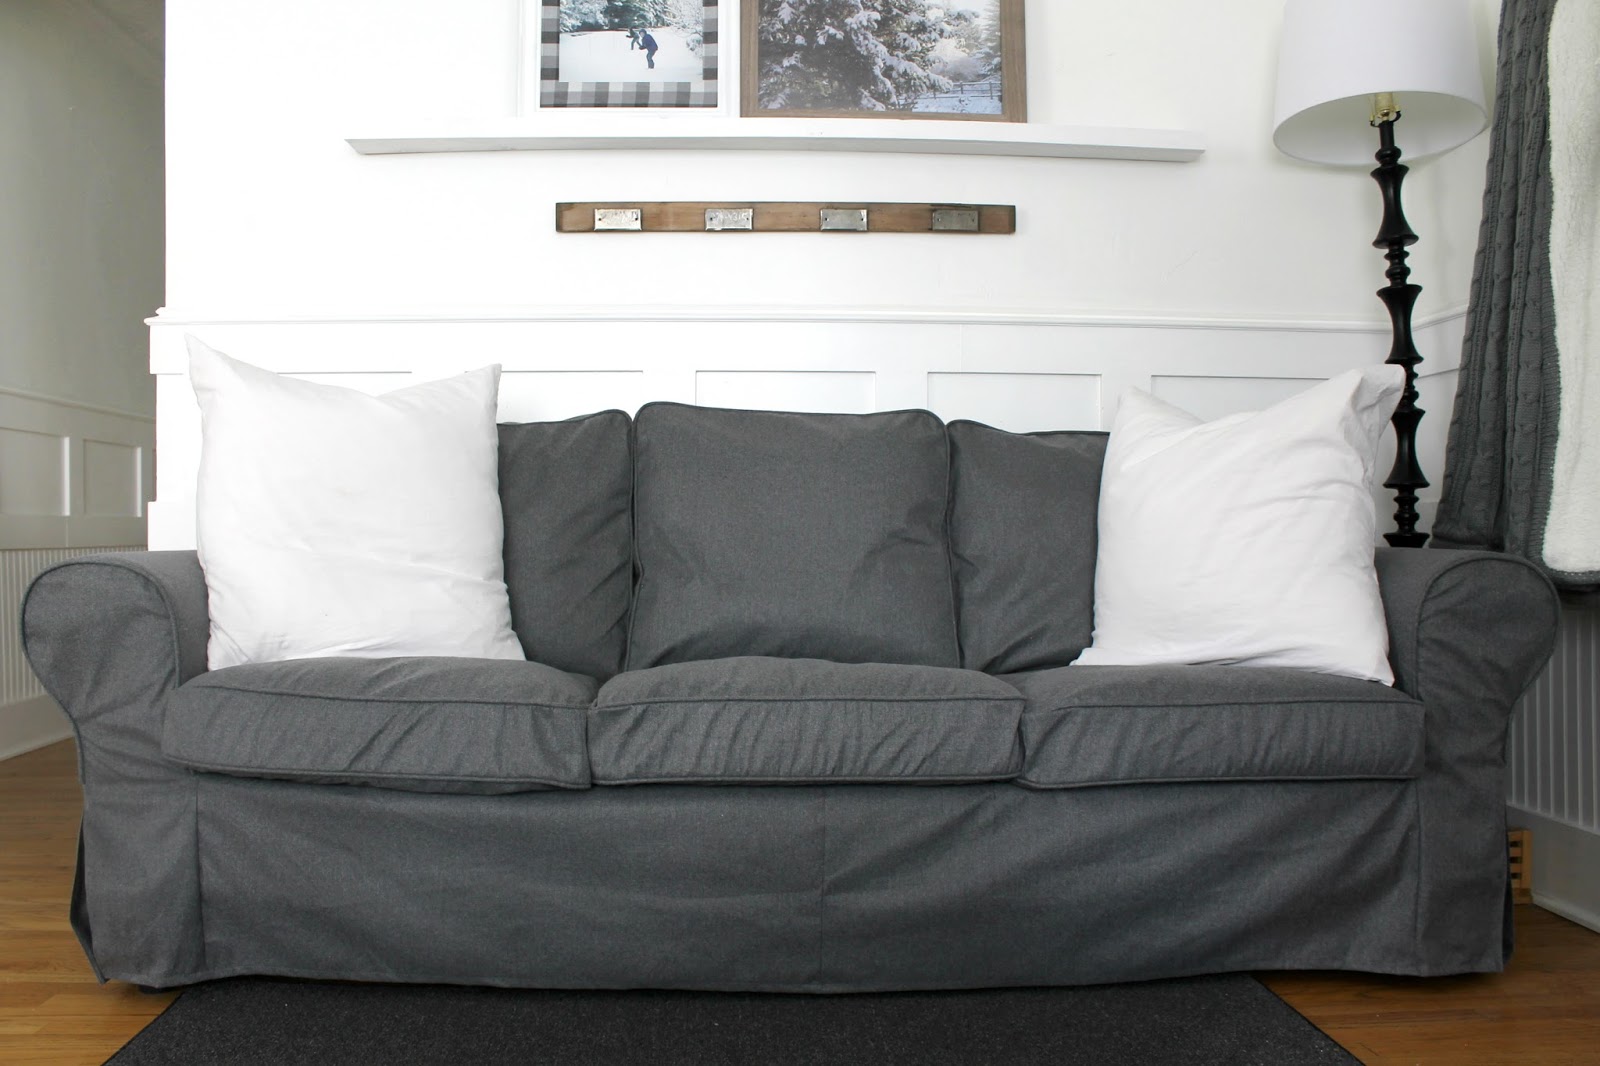 New Slipcover For My Ikea Ektorp Sofa Review The Wicker House